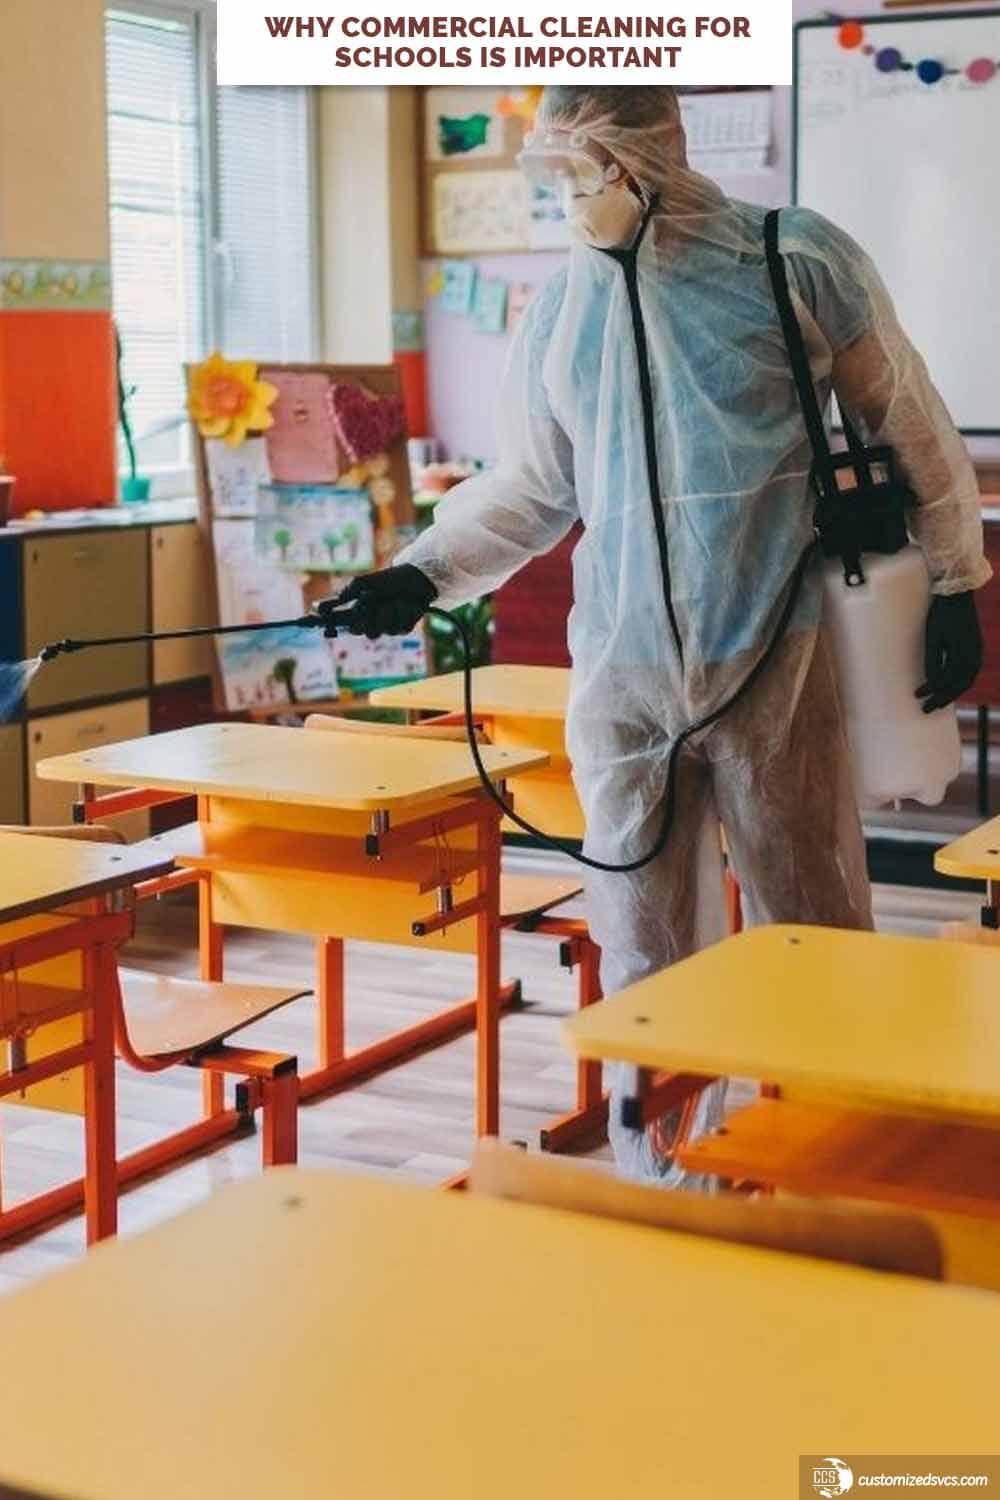 Why Commercial Cleaning For Schools Is Important